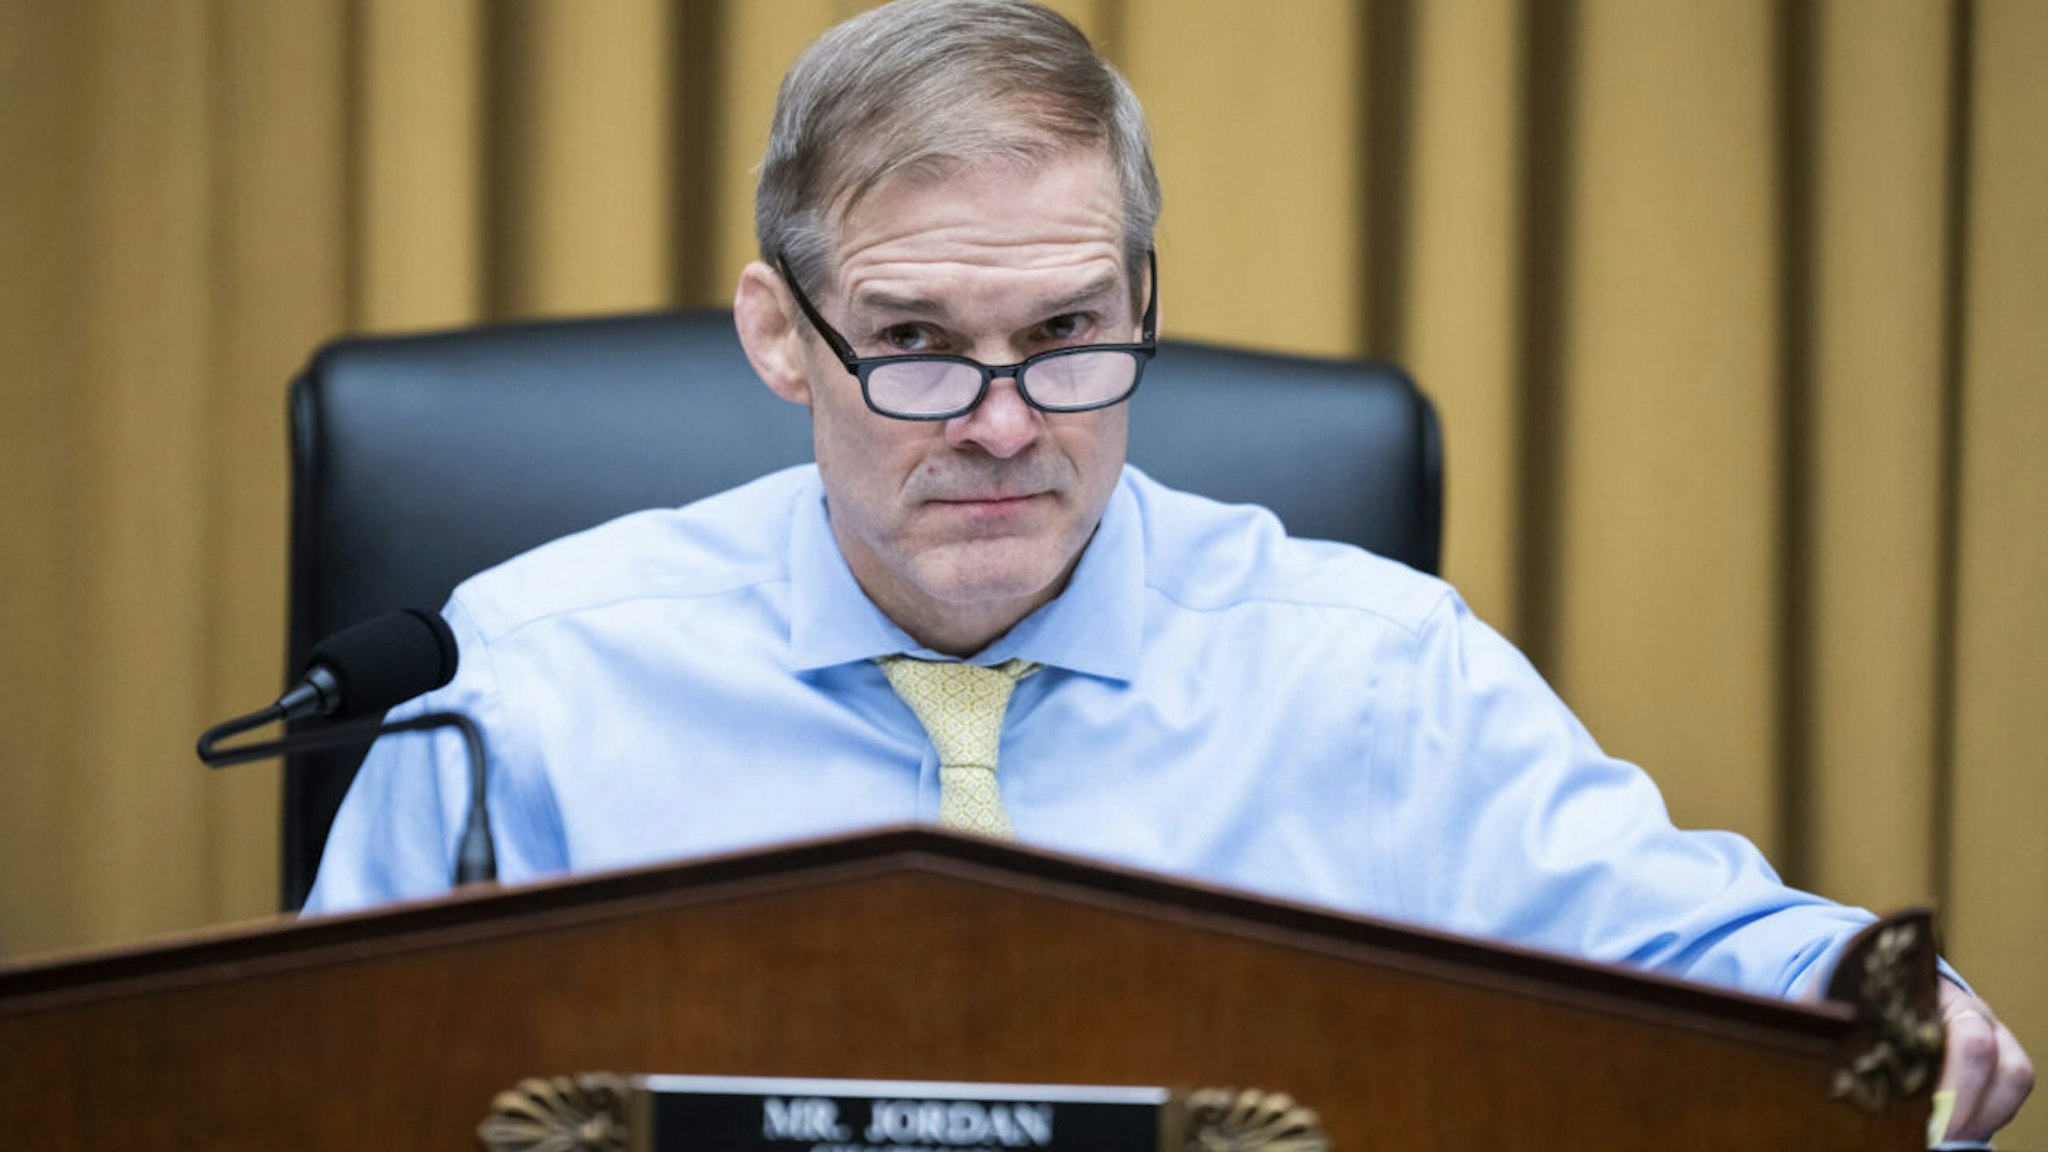 Chairman Jim Jordan, R-Ohio, conducts the House Judiciary Select Subcommittee on the Weaponization of the Federal Government hearing titled The Twitter Files, in Rayburn Building on Thursday, March 9, 2023.